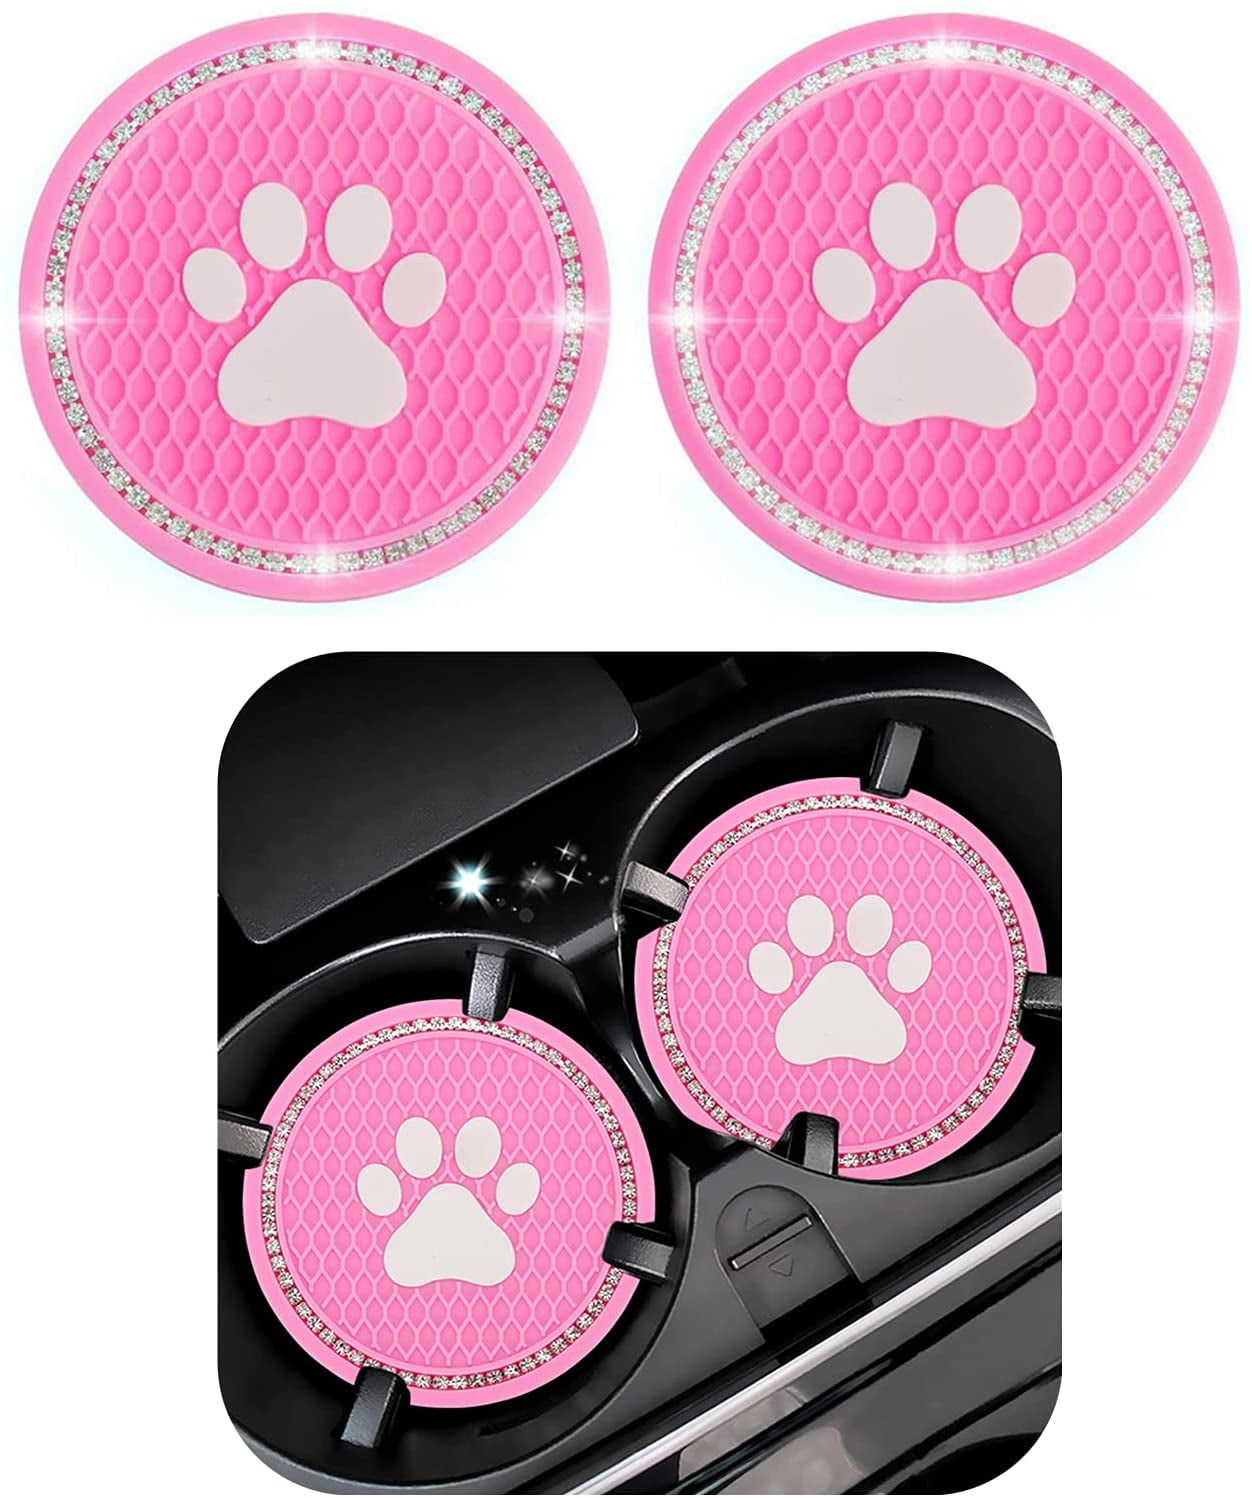 Thirstystone Paw Prints Car Cup Holder Coaster 2pack for sale online 